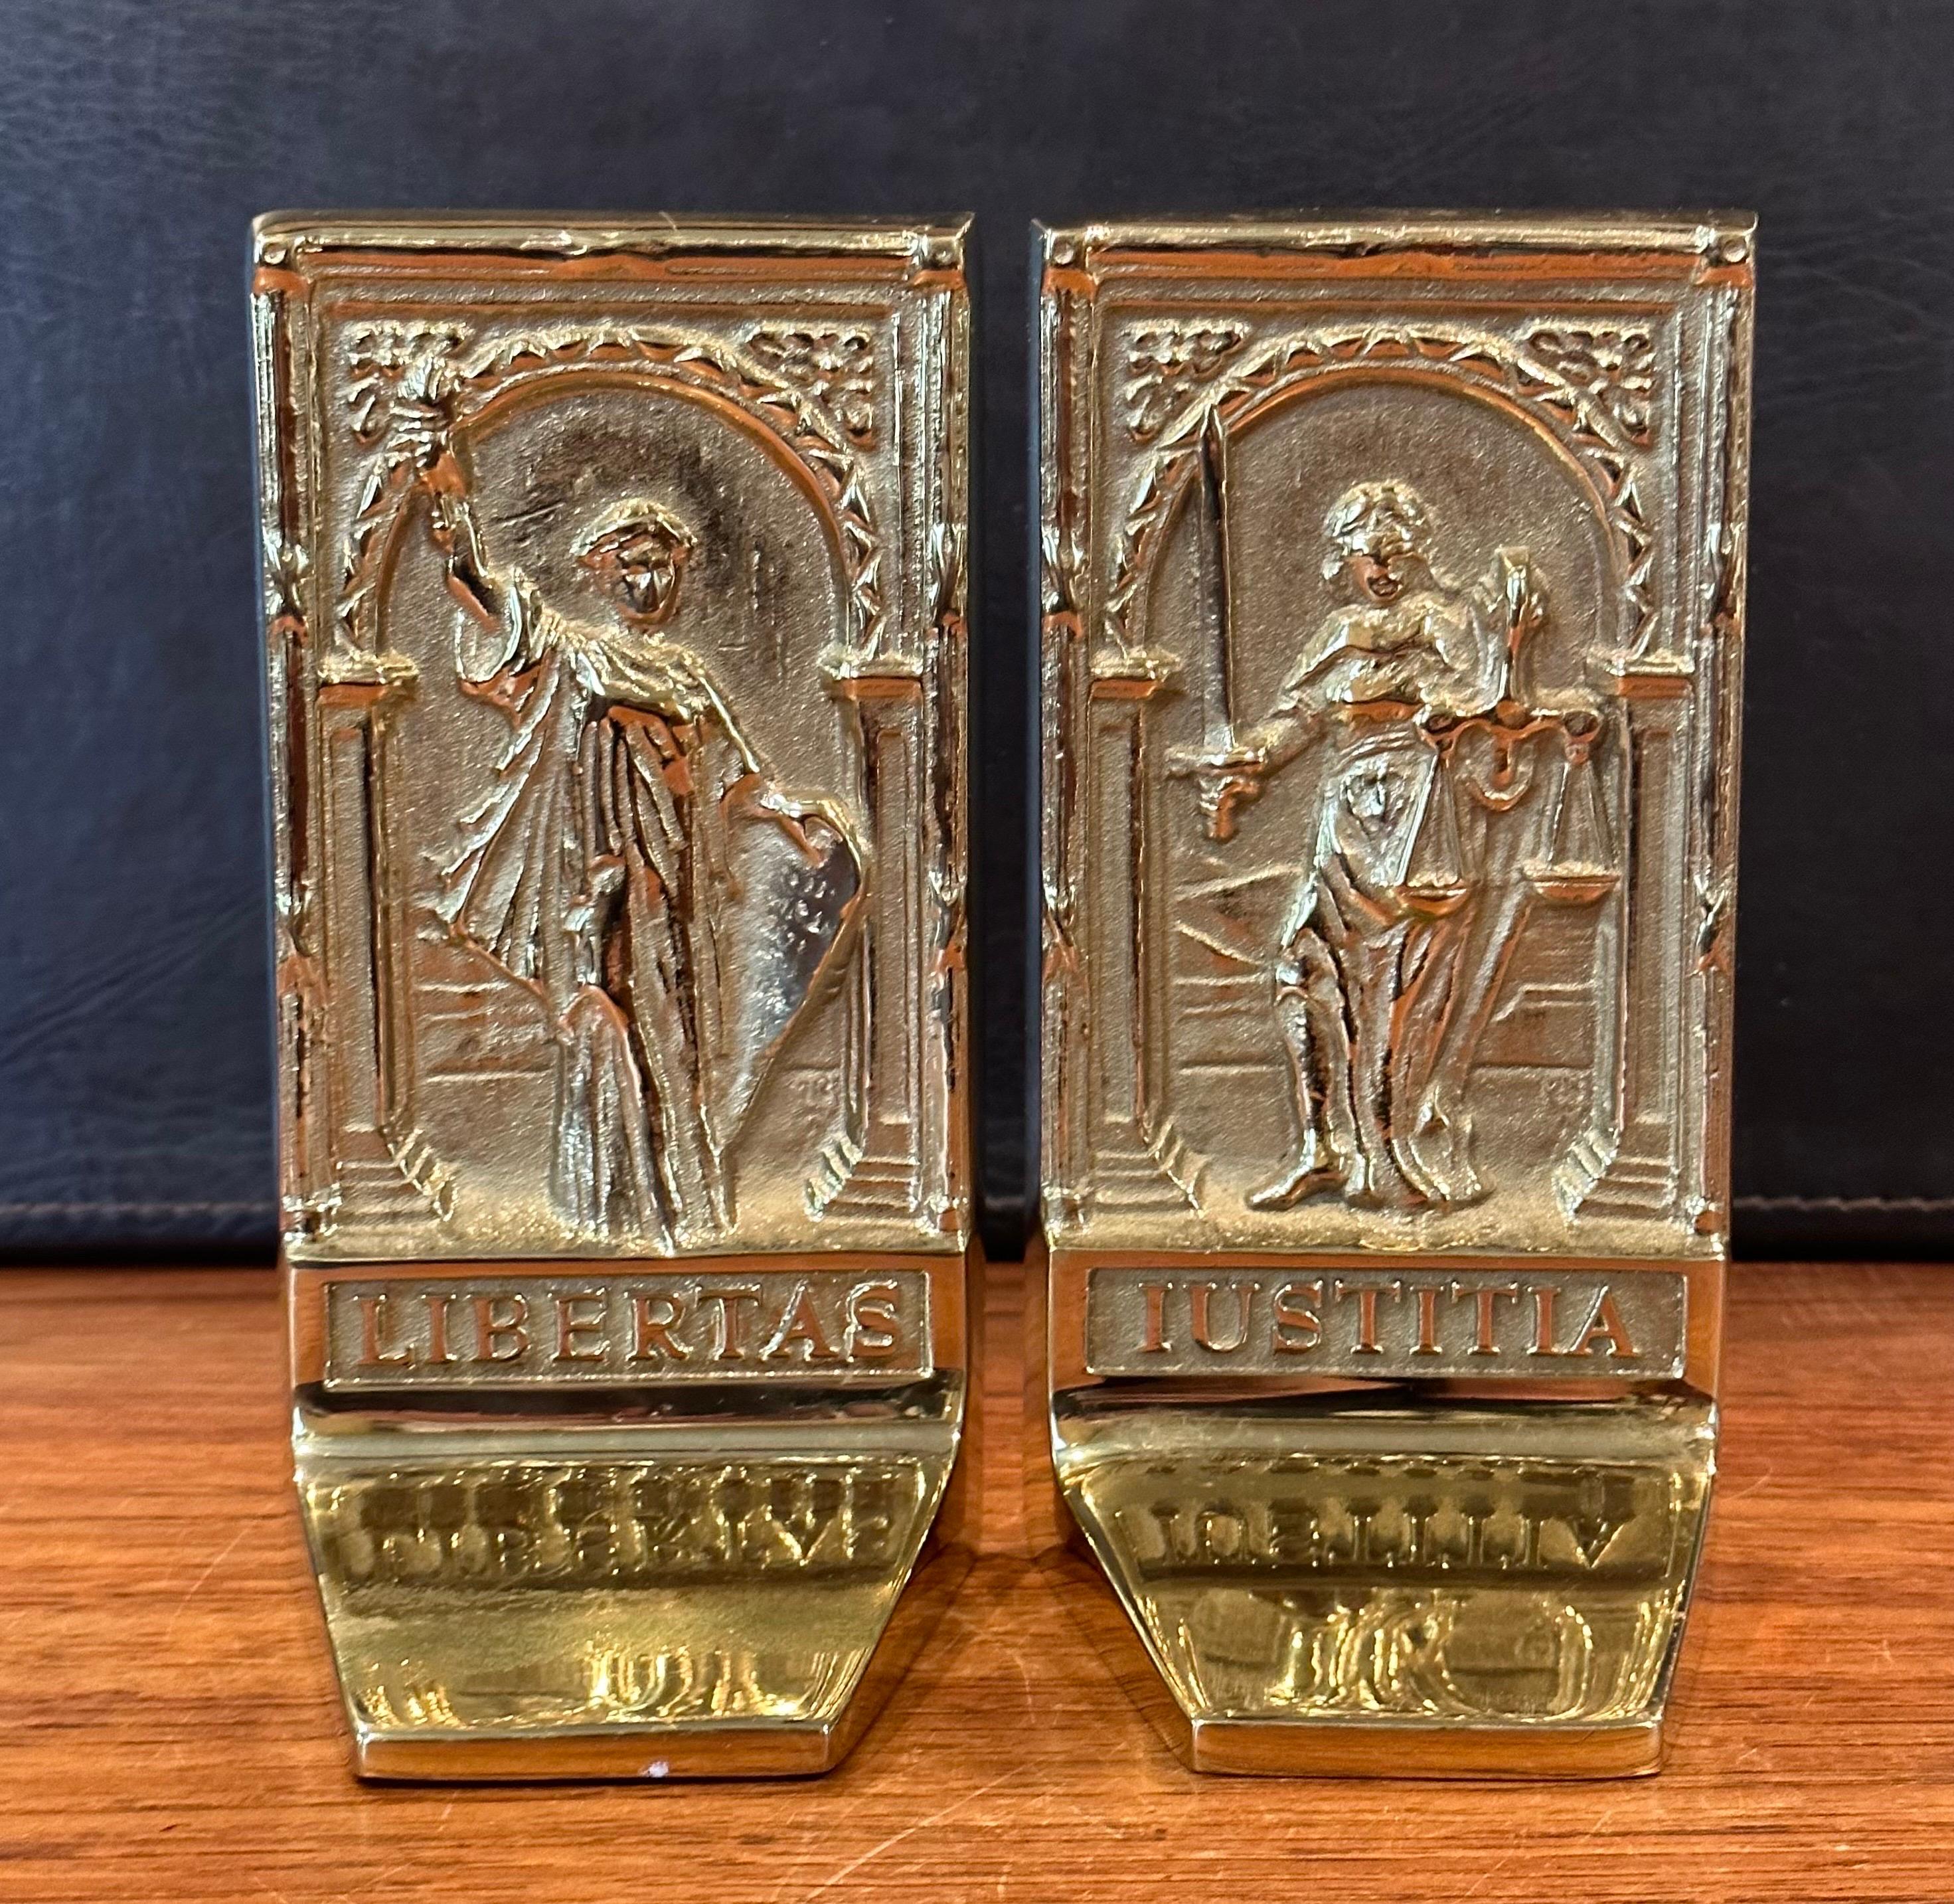 Pair of Rare Solid Brass Libertas & Justitia Bookends by Virginia Metalcrafters For Sale 9